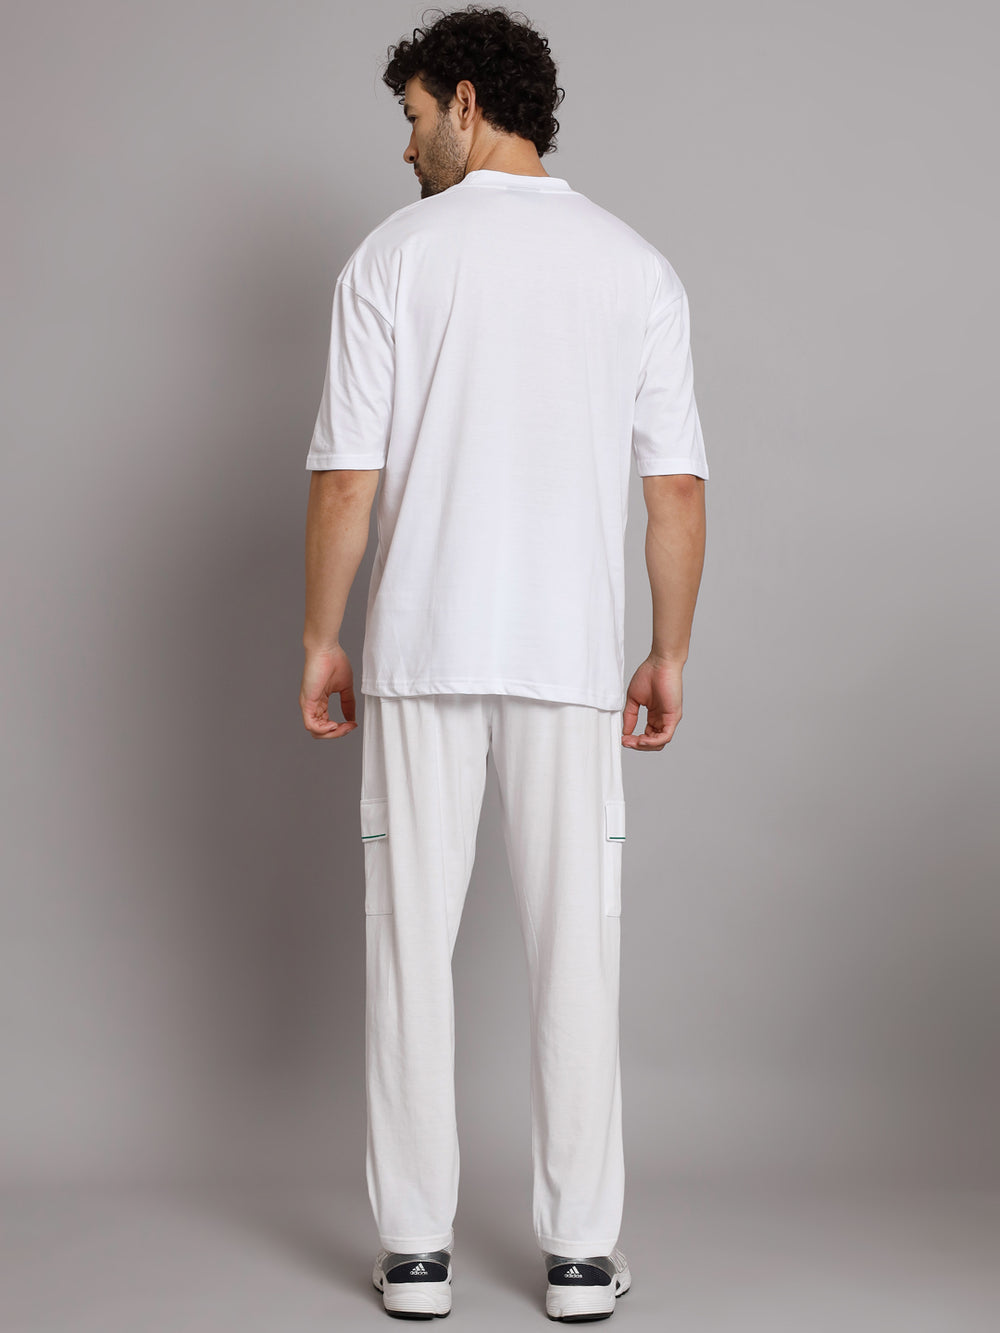 GRIFFEL Men Printed White Regular fit T-shirt and Trackpant Set - griffel